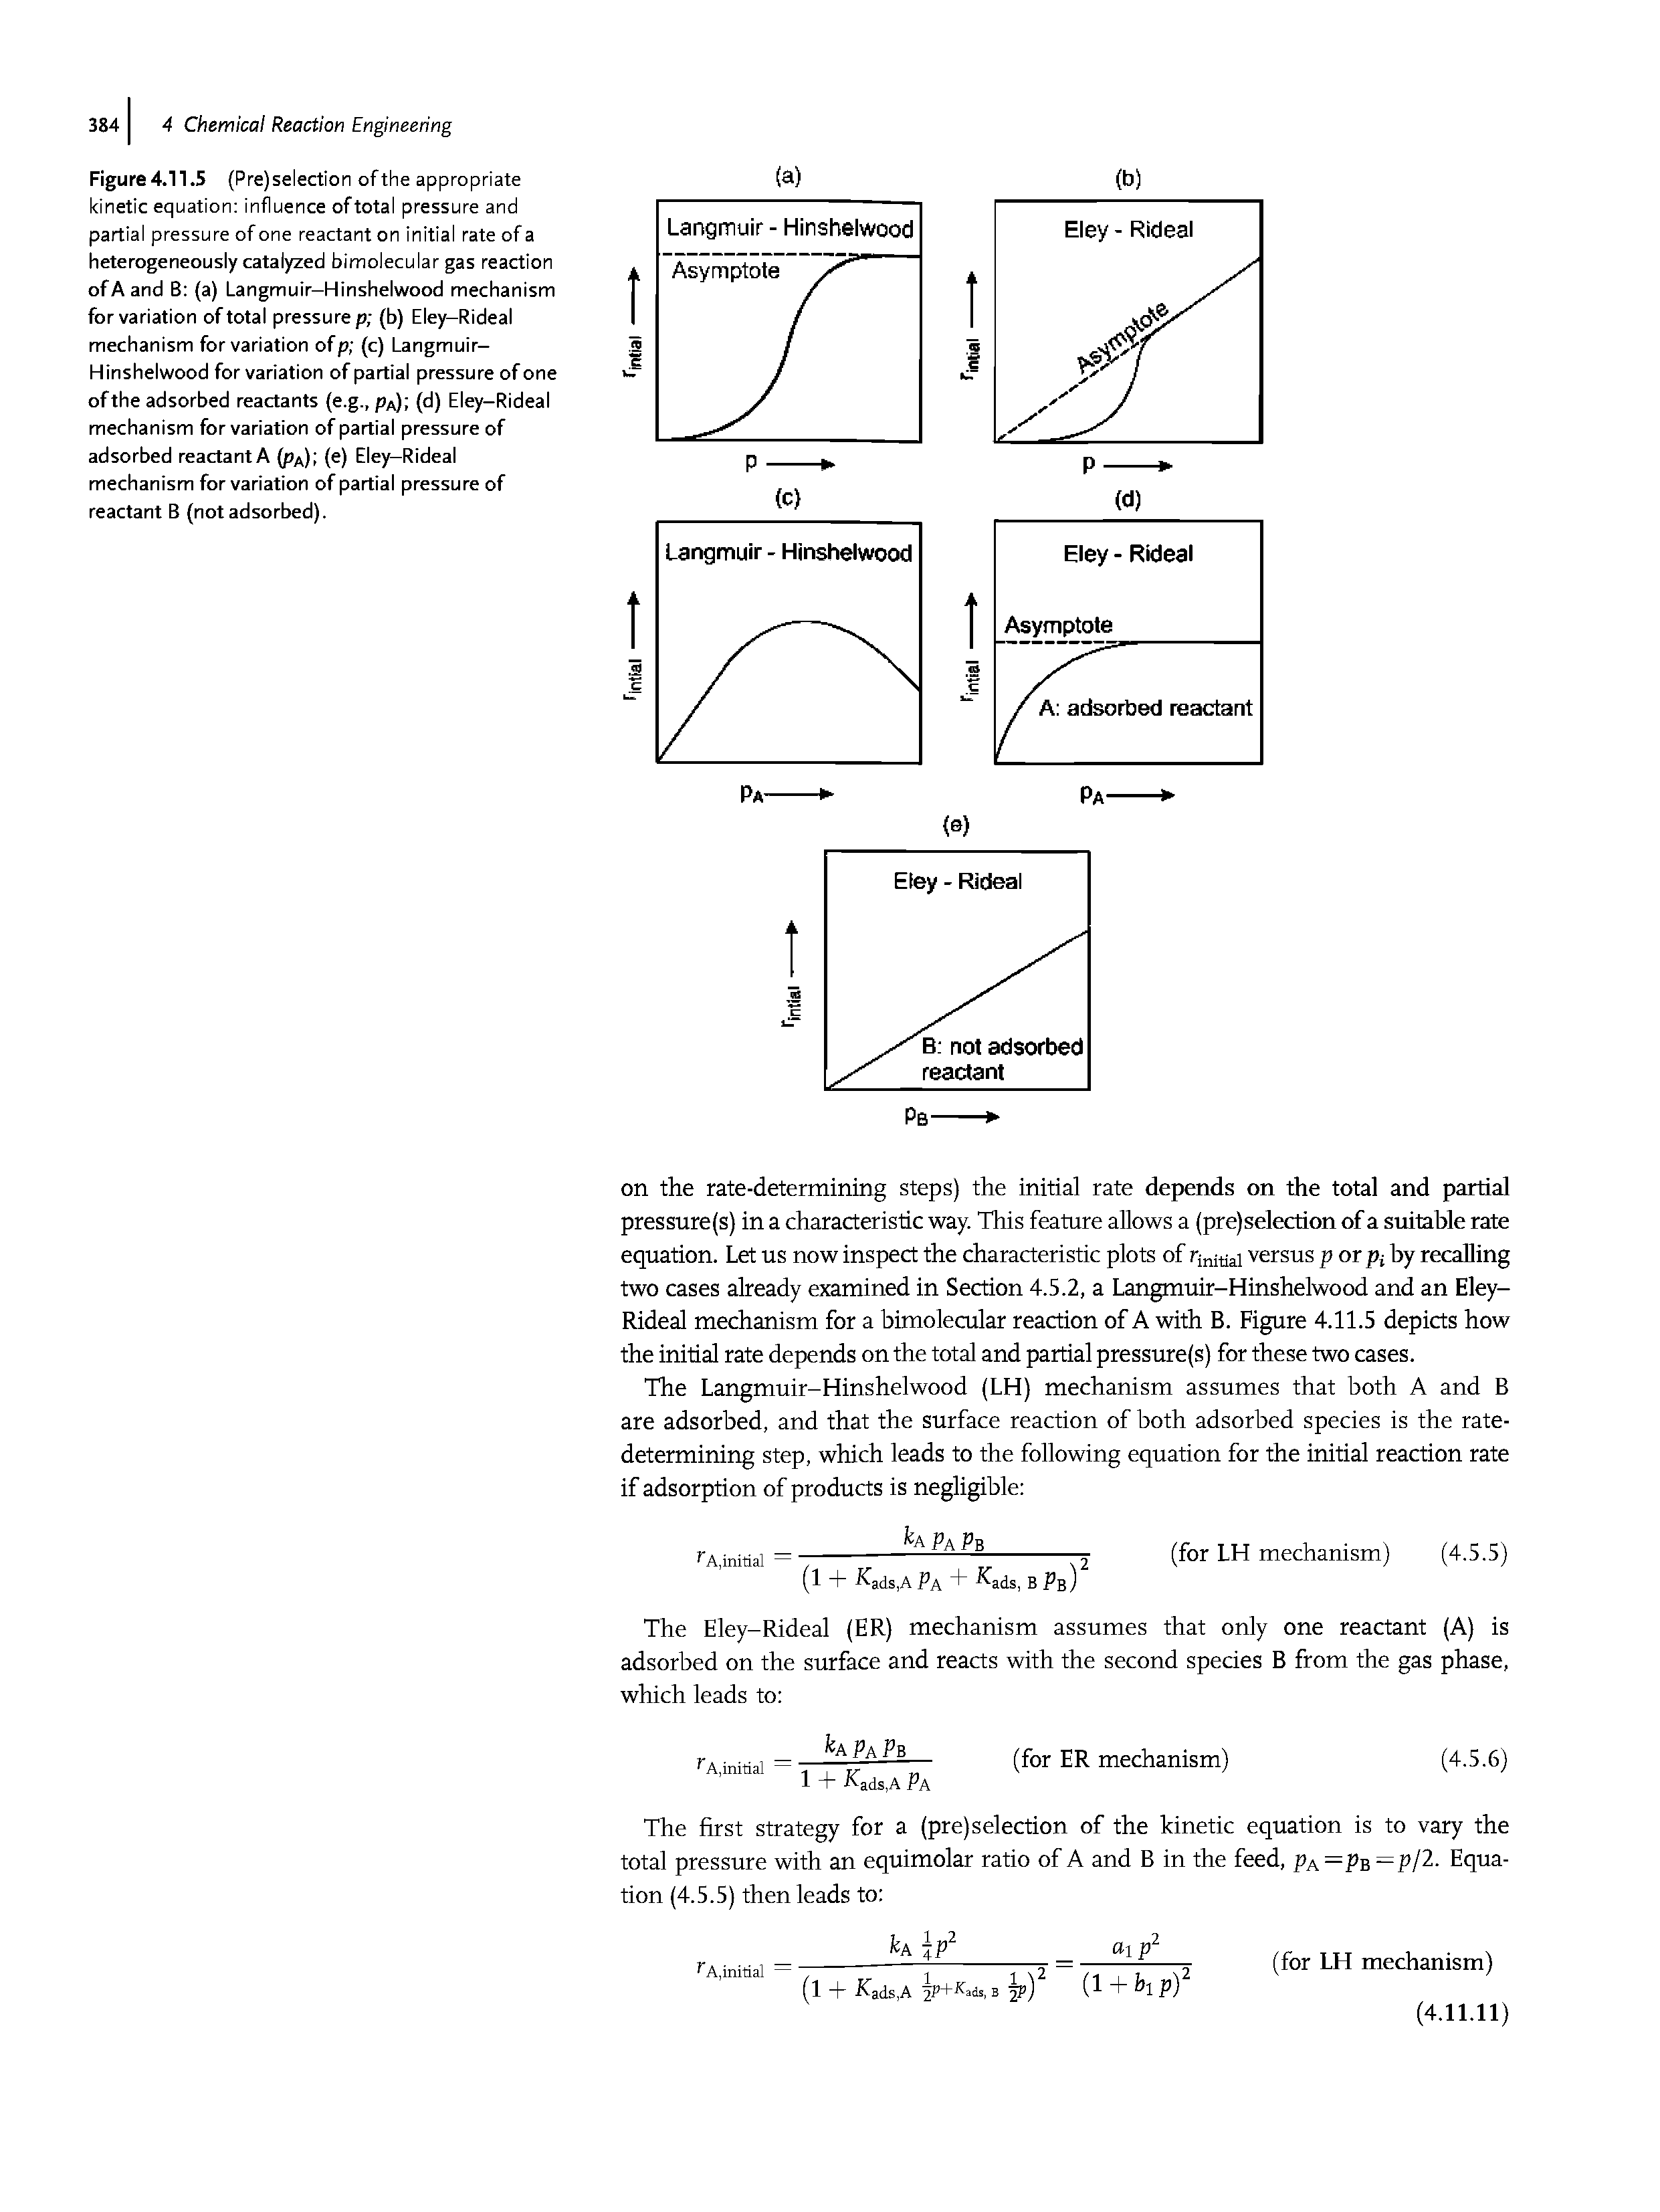 Figure4.11.5 (Pre)selection ofthe appropriate kinetic equation influence of total pressure and partial pressure of one reactant on initial rate of a heterogeneously catalyzed bimolecular gas reaction of A and B (a) Langmuir-Hinshelwood mechanism for variation of total pressure p (b) Eley-Rideal mechanism for variation ofp (c) Langmuir-Hinshelwood for variation of partial pressure of one ofthe adsorbed reactants (e.g., Pa) (d) Eley-Rideal mechanism for variation of partial pressure of adsorbed reactantA (p ) (e) Eley-Rideal mechanism for variation of partial pressure of reactant B (not adsorbed).